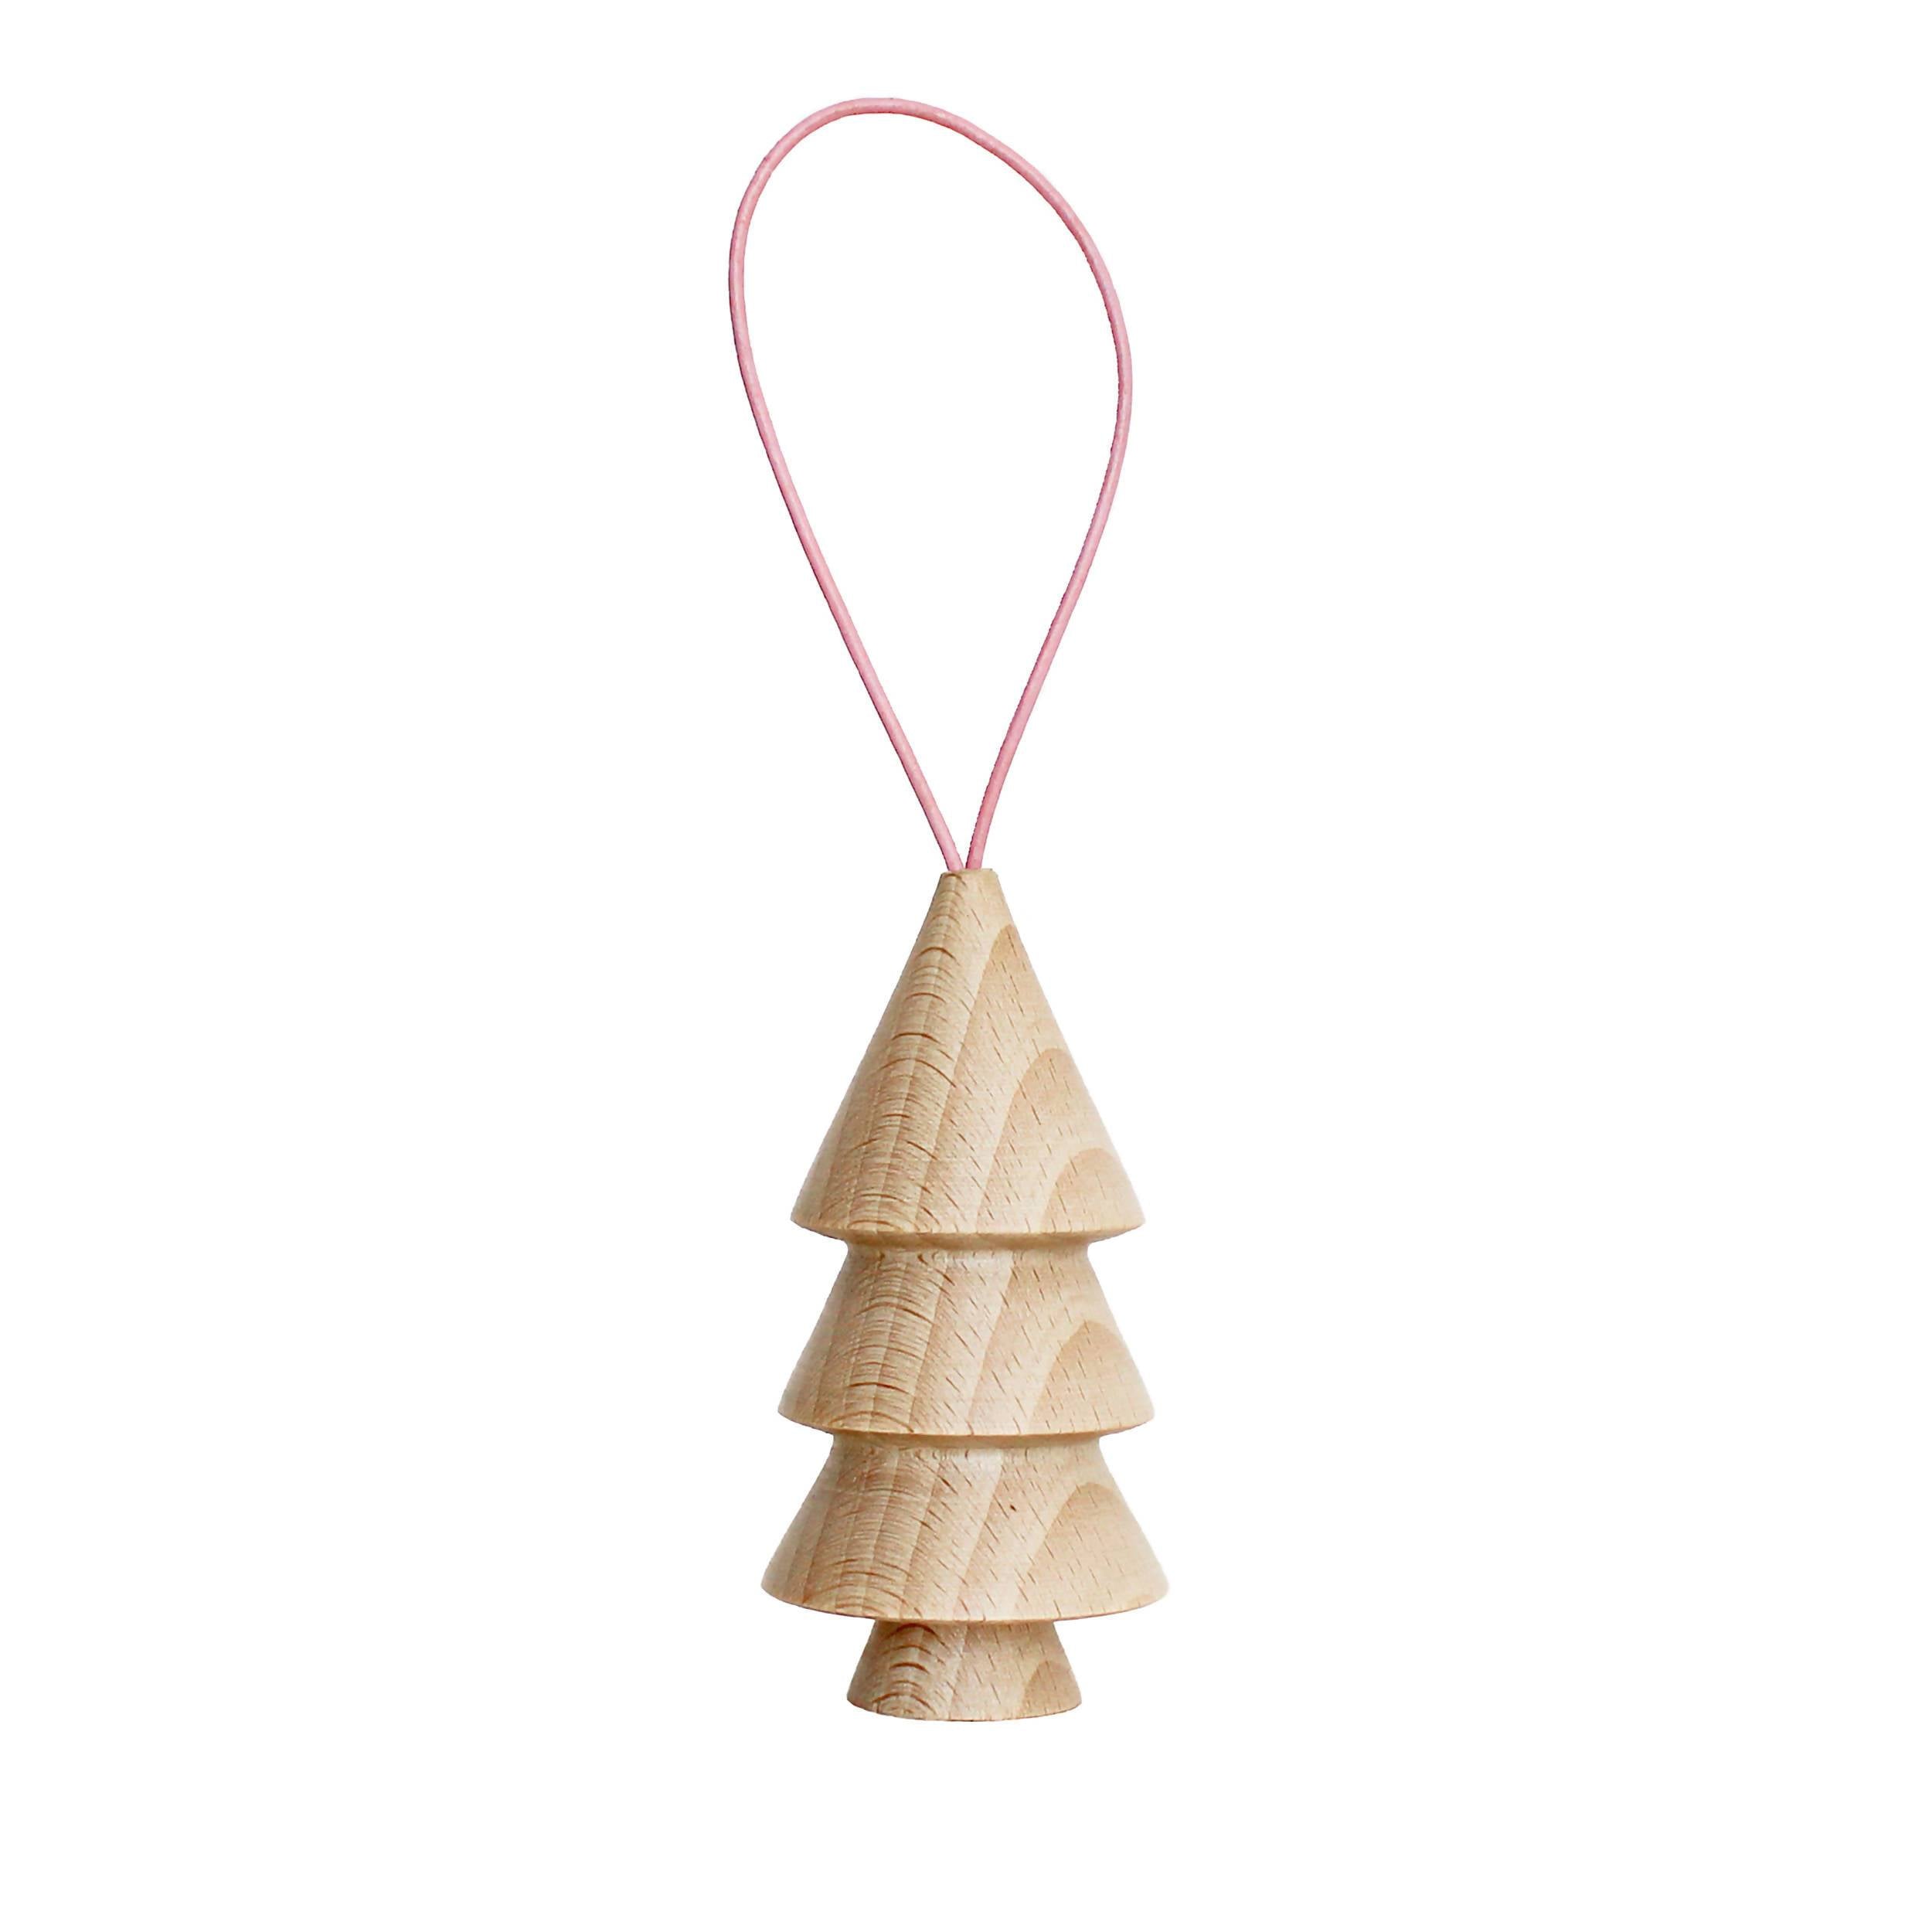 Wooden Christmas Tree Hanger - Tree Nr. 3 Home Decor 5mm Paper Pastel Pink 